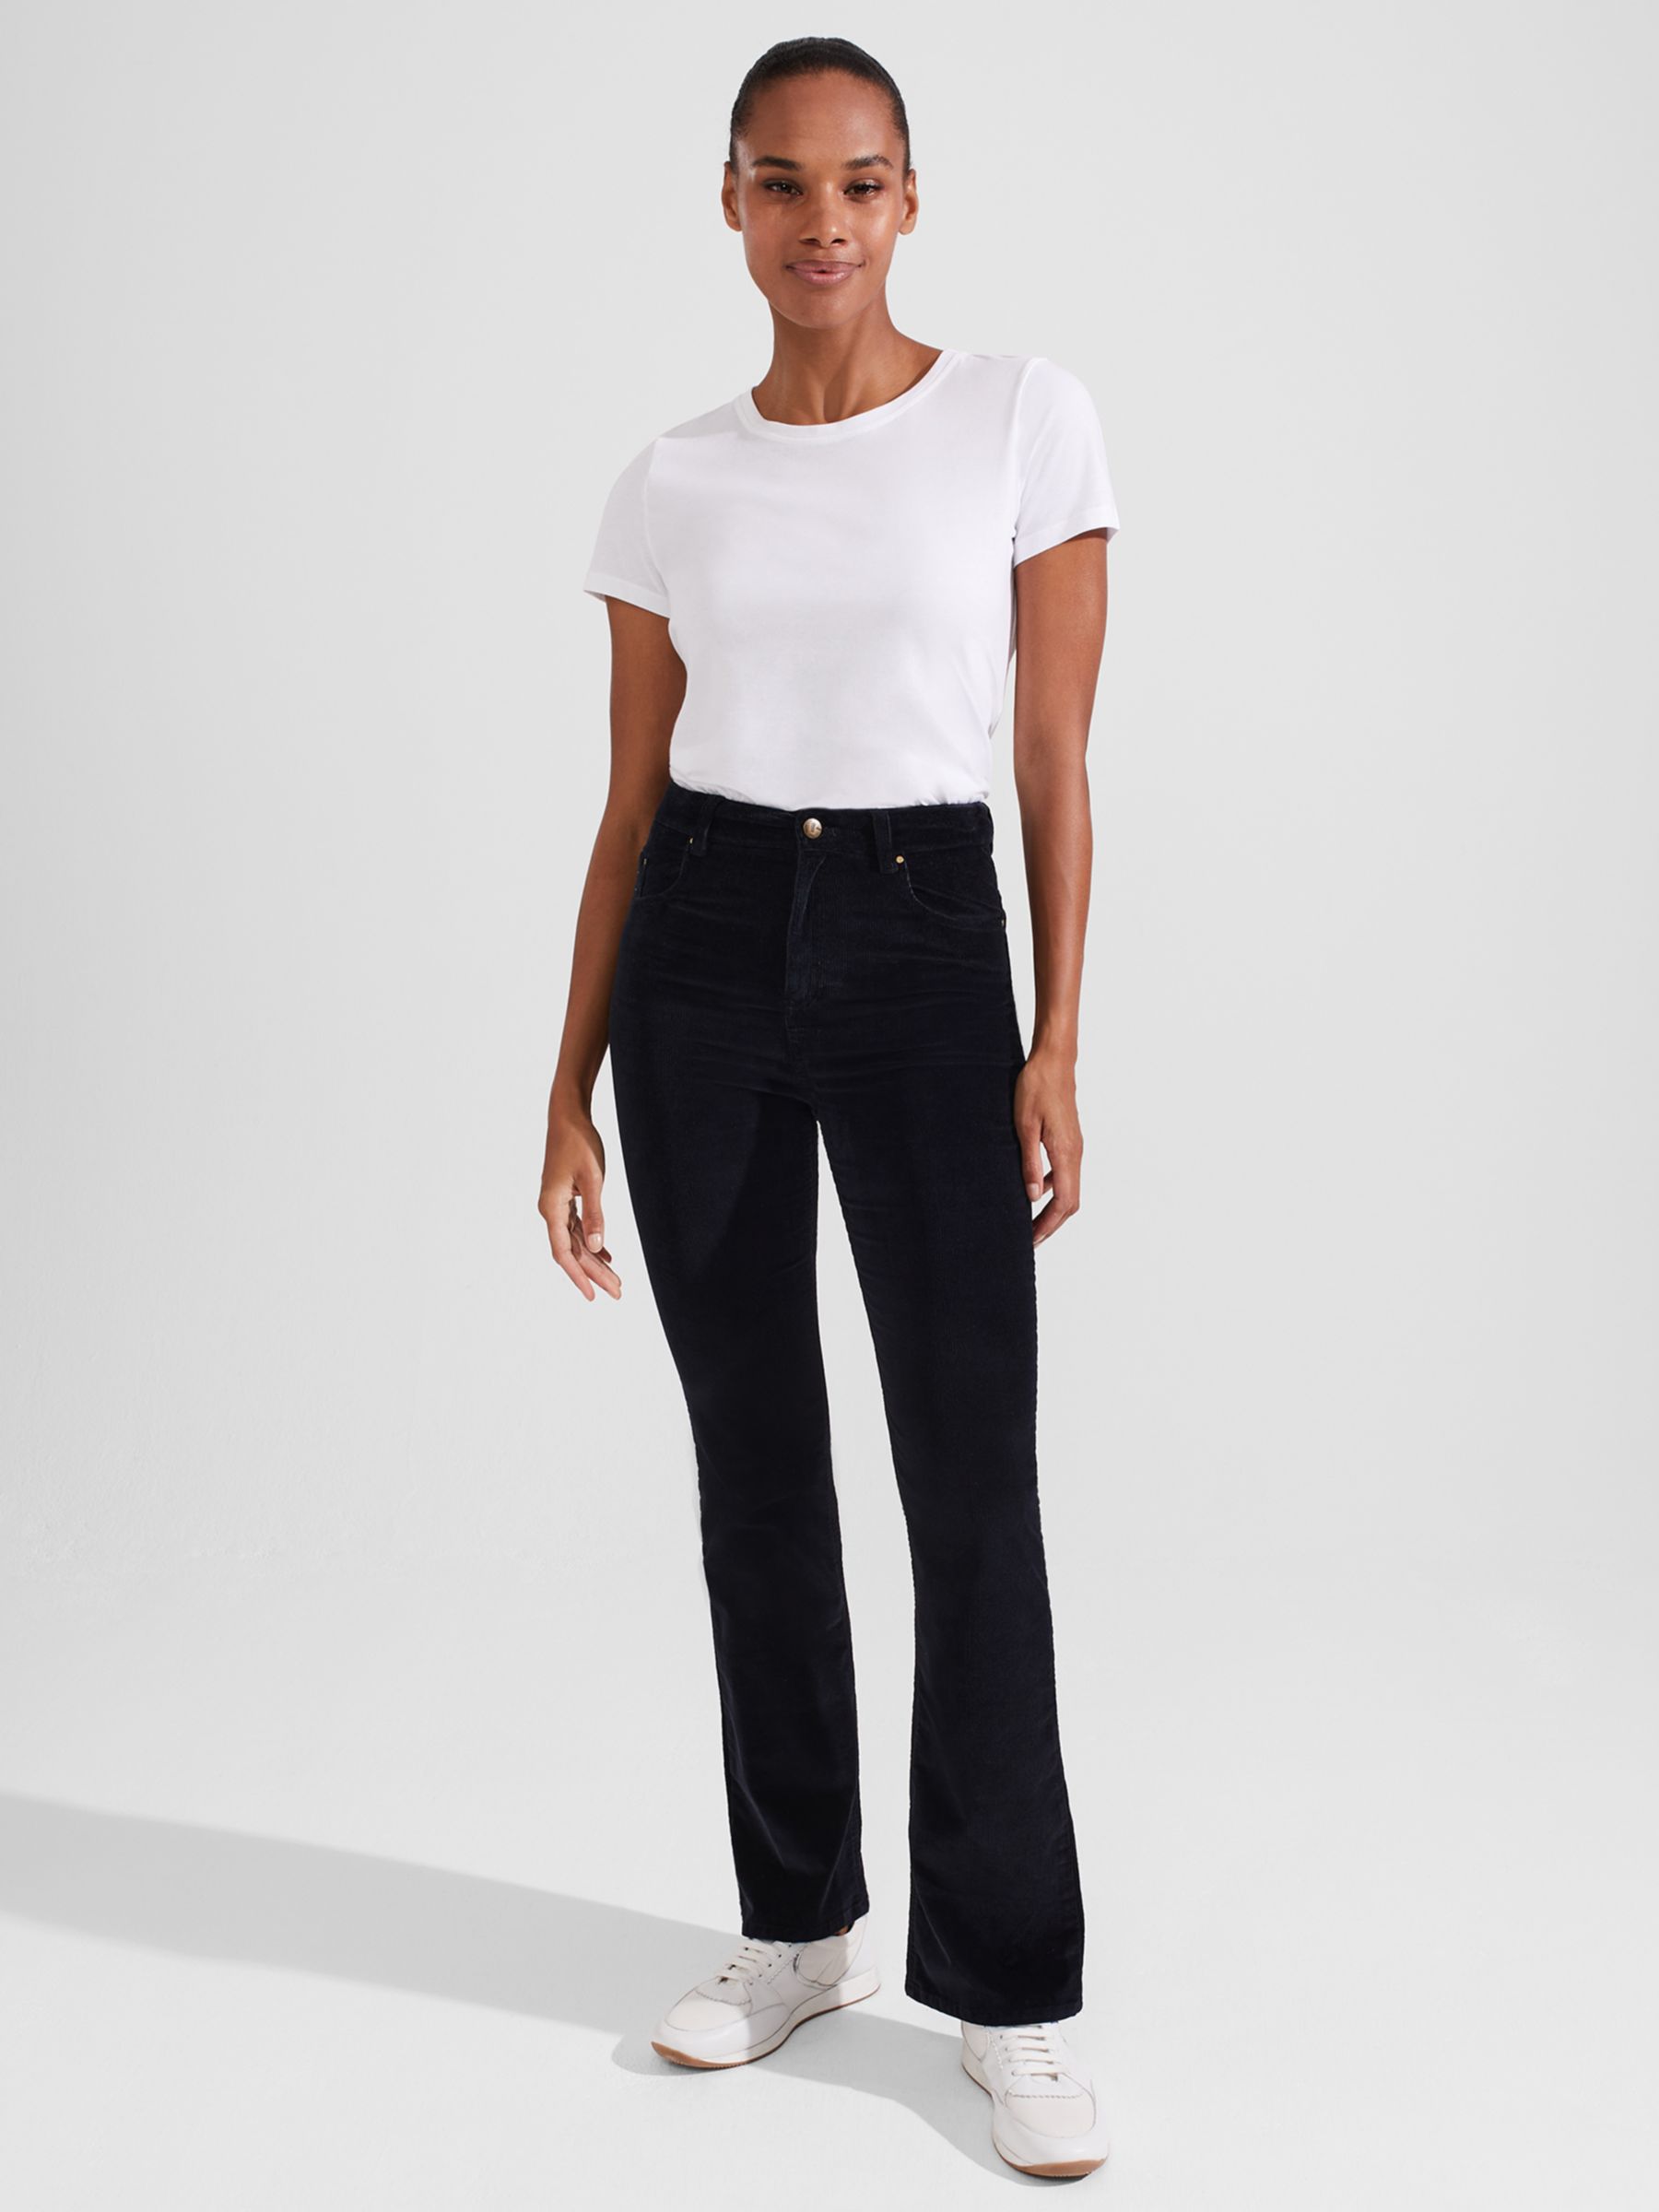 Hobbs Remy Cord Jeans, Navy at John Lewis & Partners